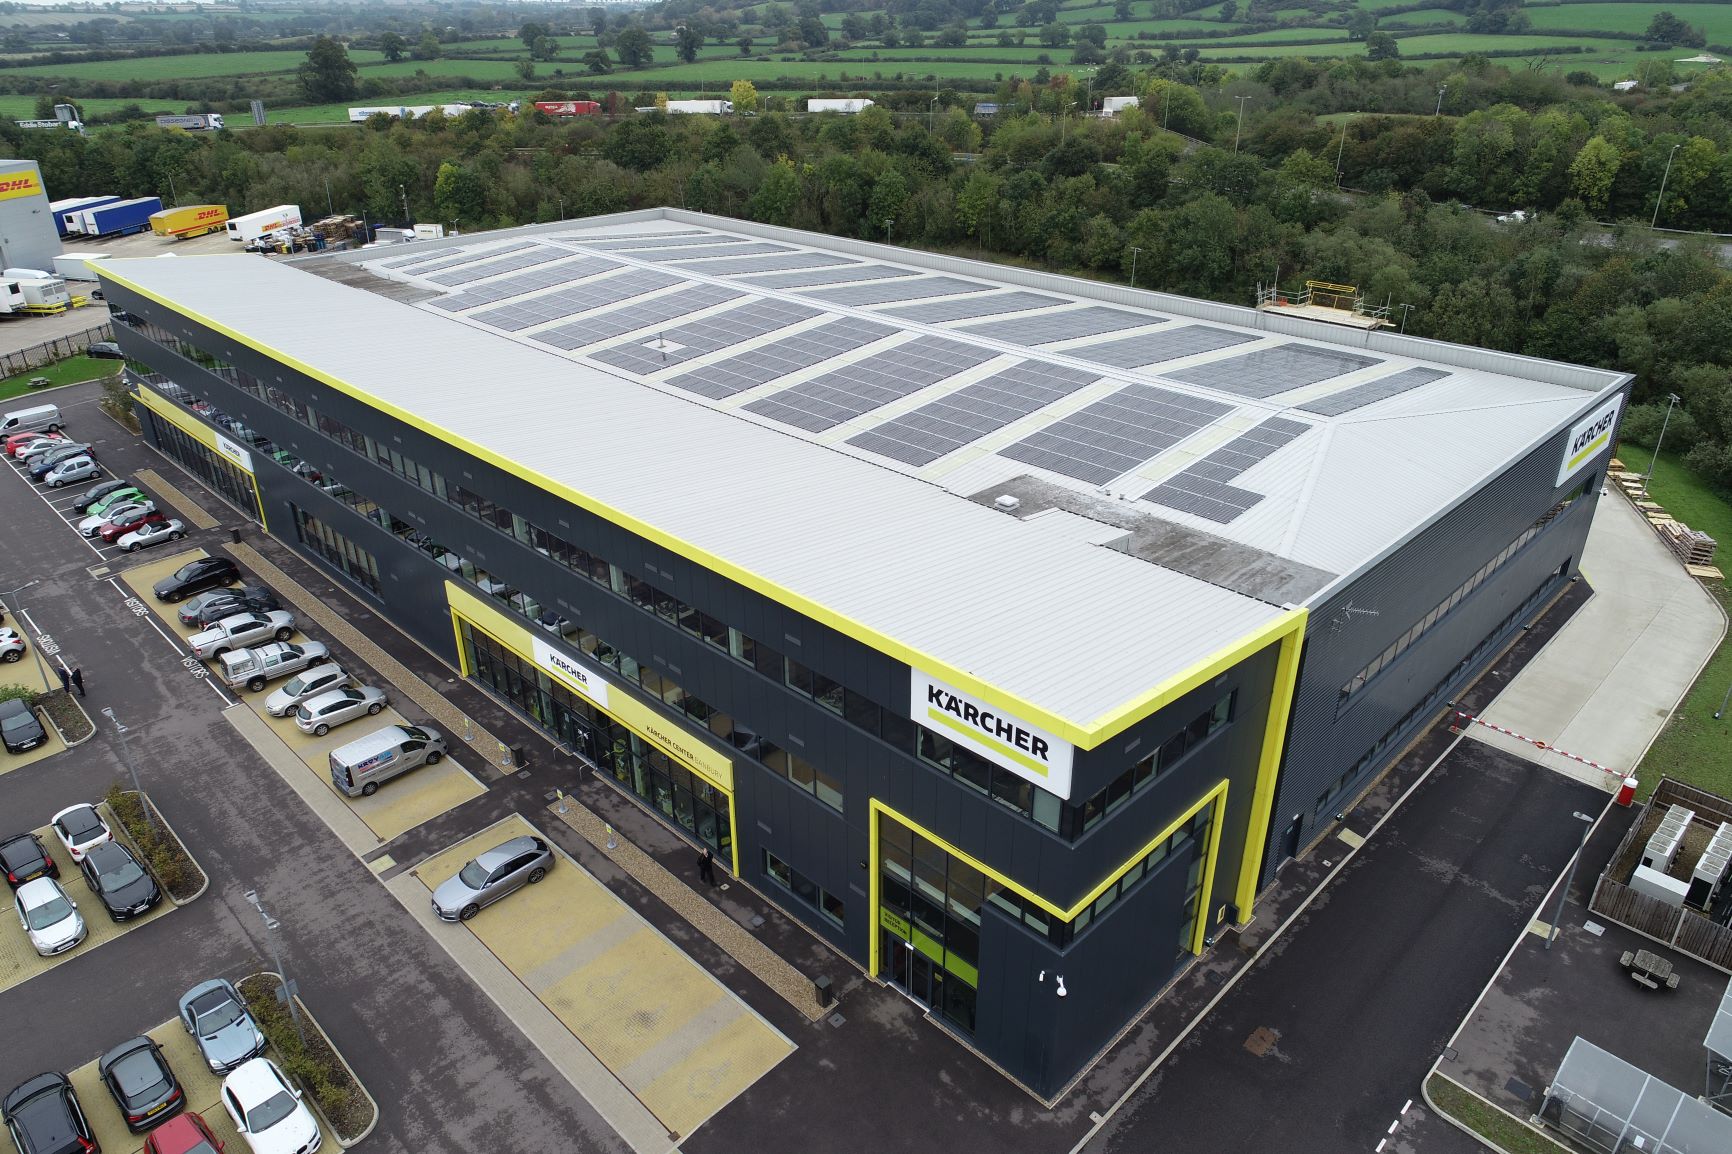 967 solar panels are now on the roof of Kärcher's Banbury headquarters.